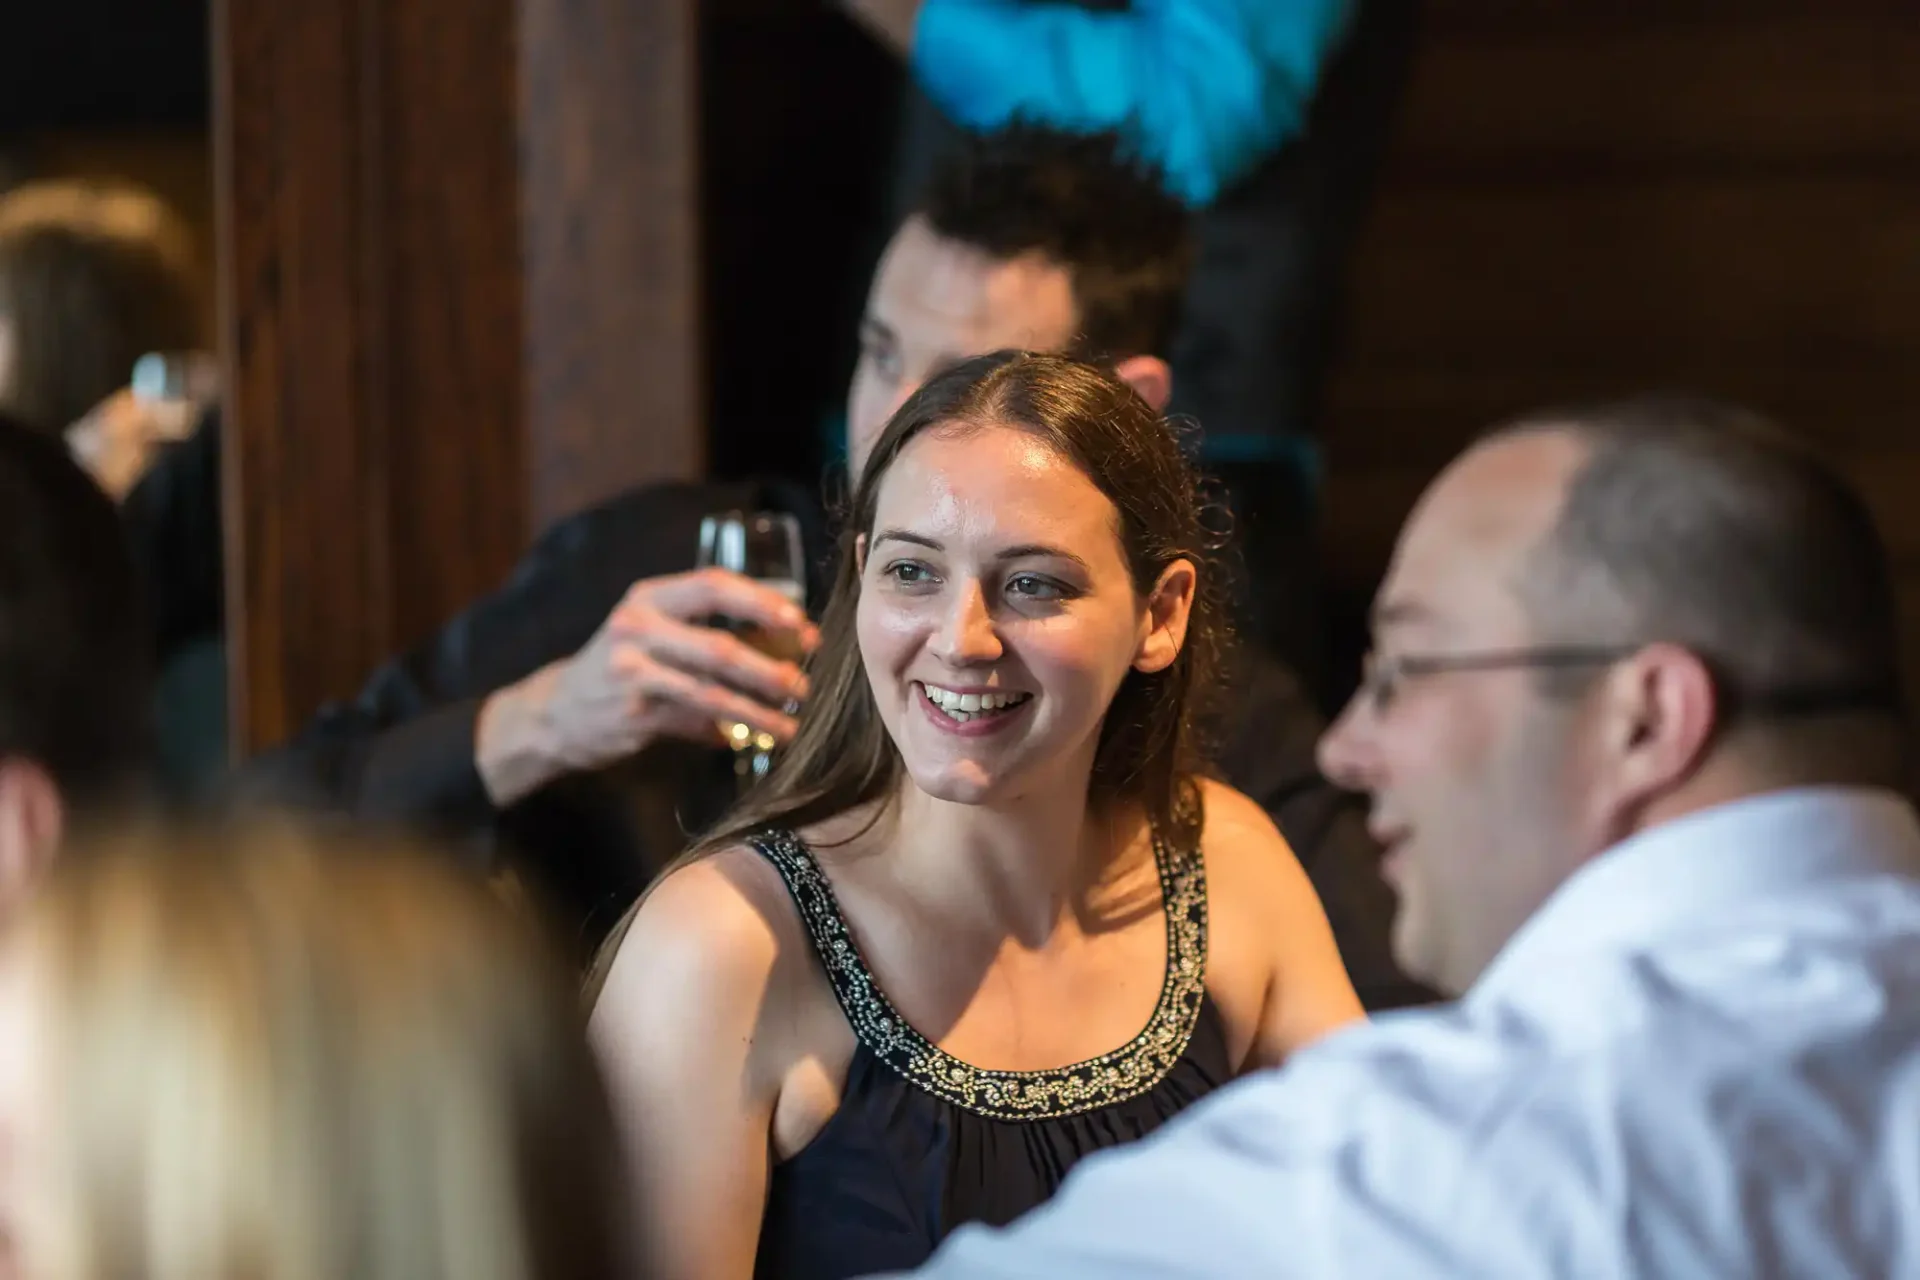 A woman in a black dress smiles during a conversation with two men at a social event, with another person holding a drink in the background.